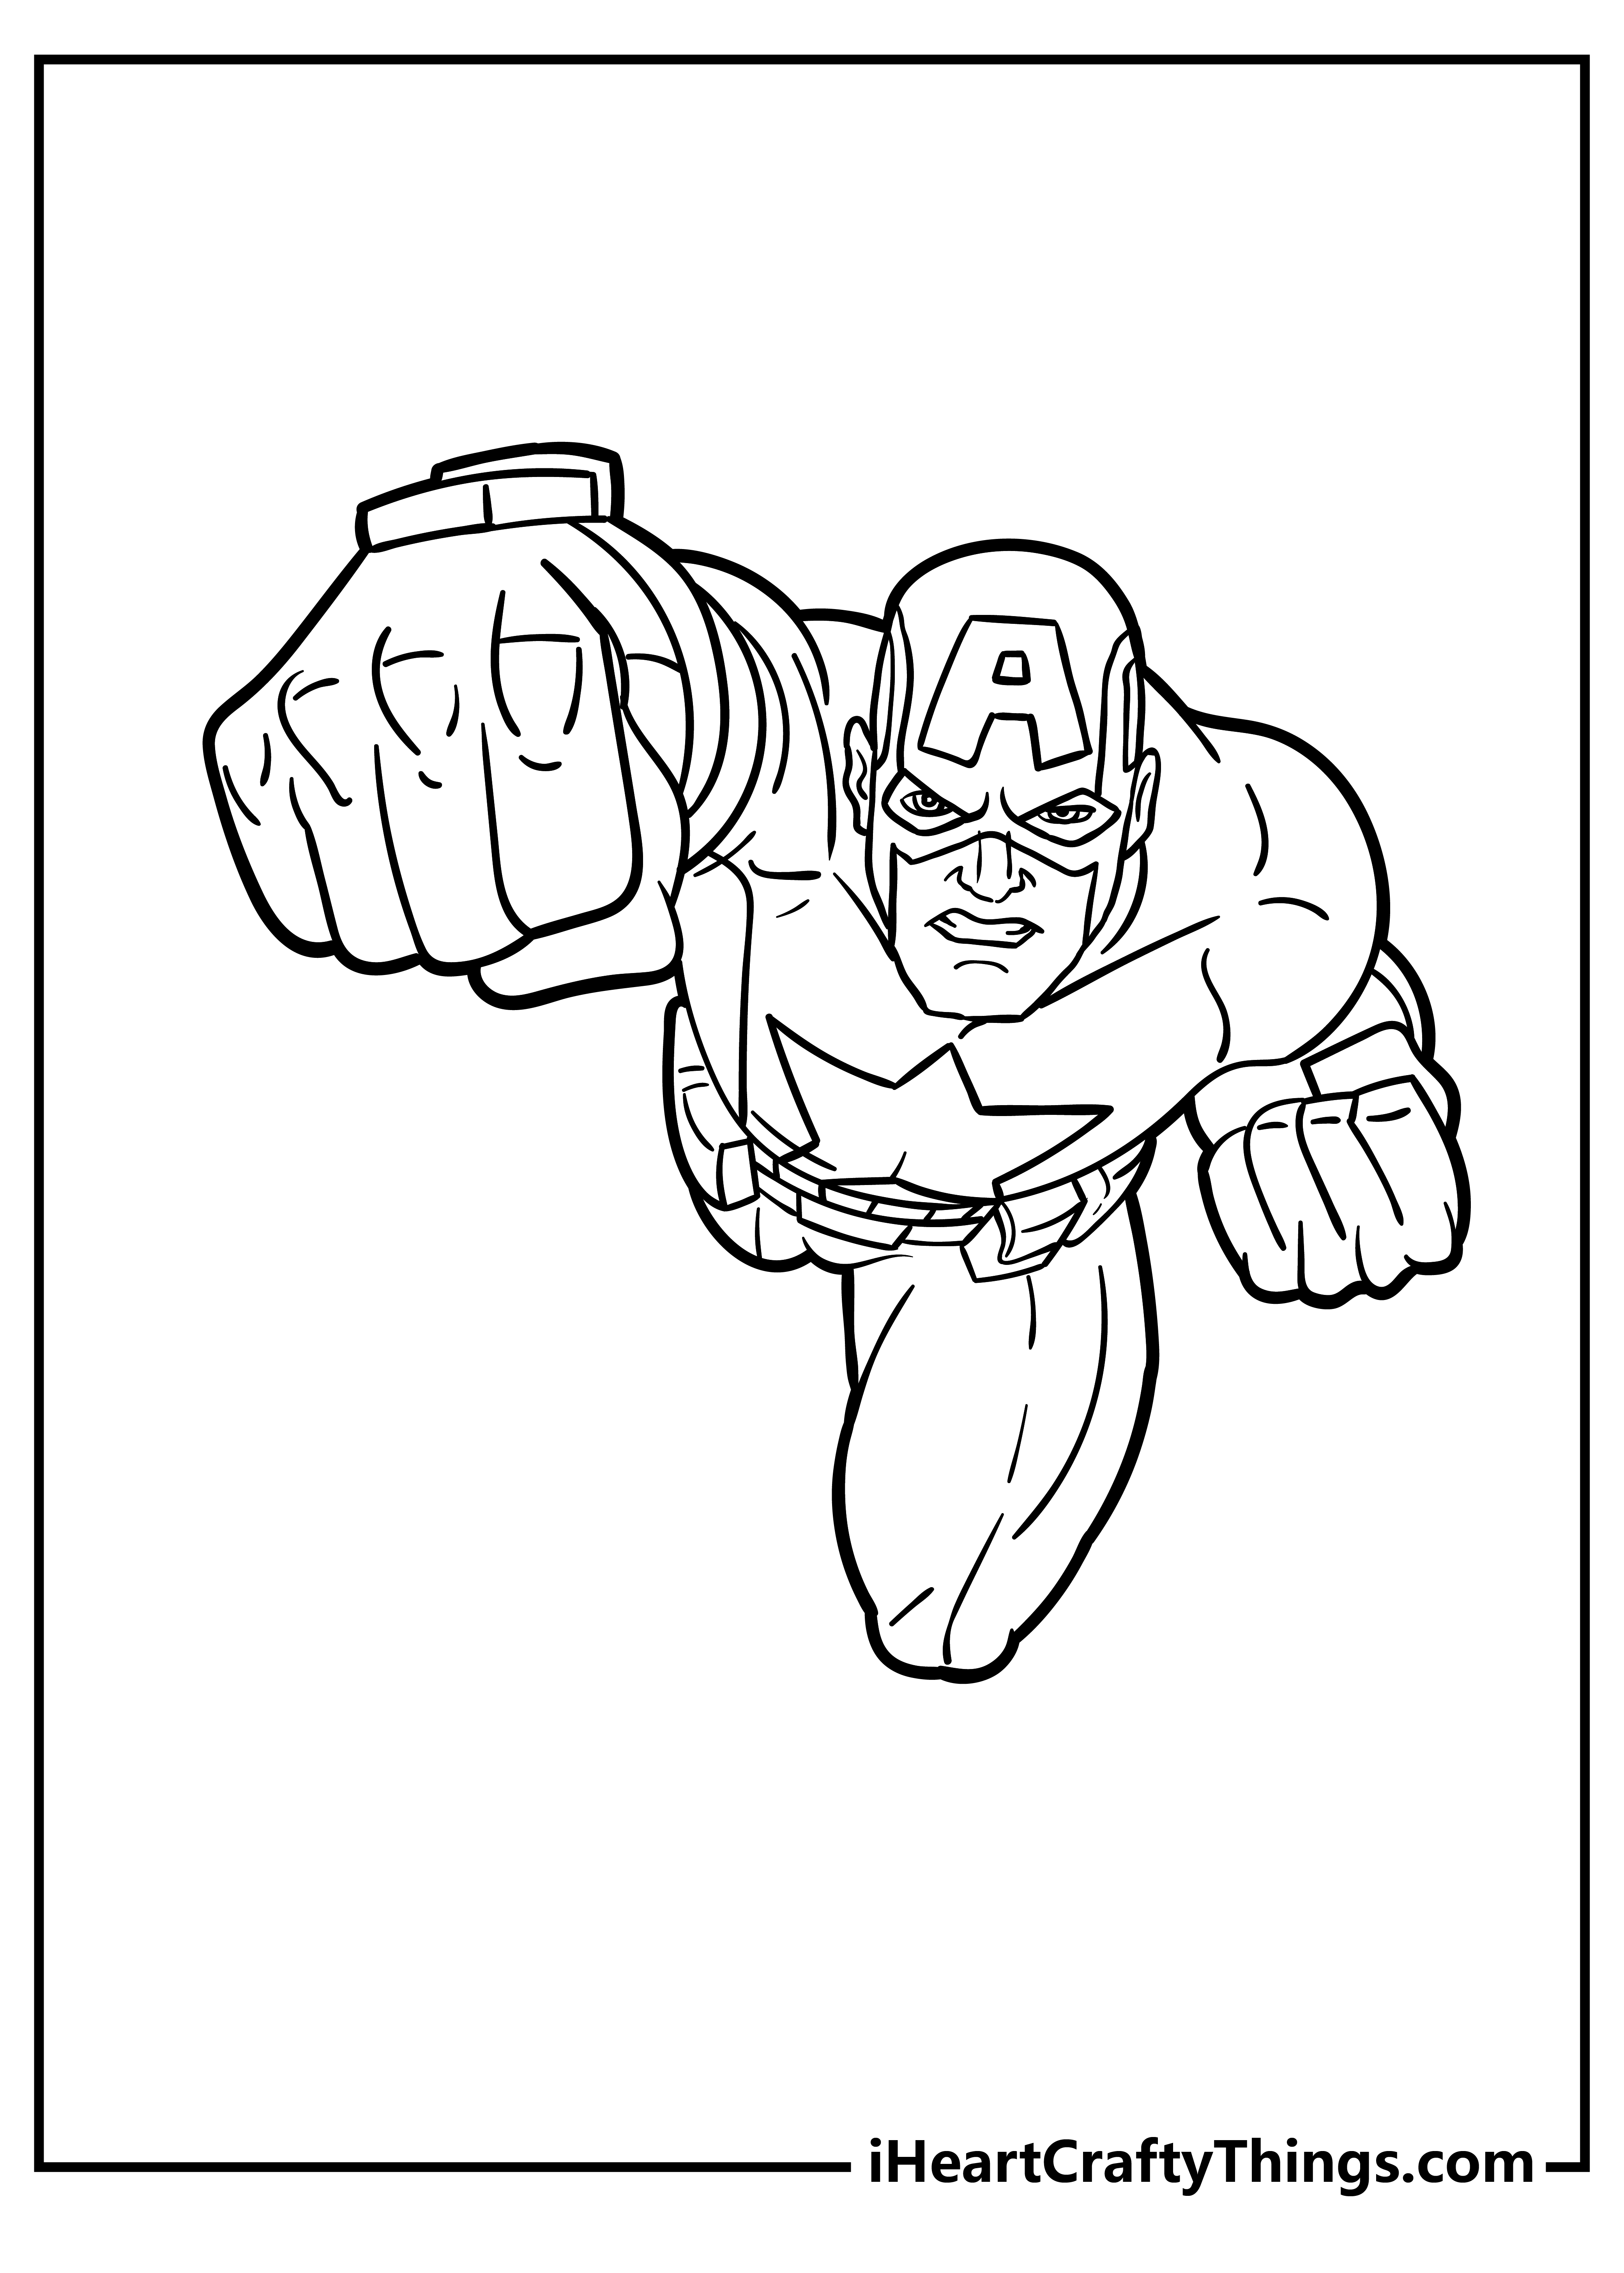 Captain America Coloring Book for adults free download